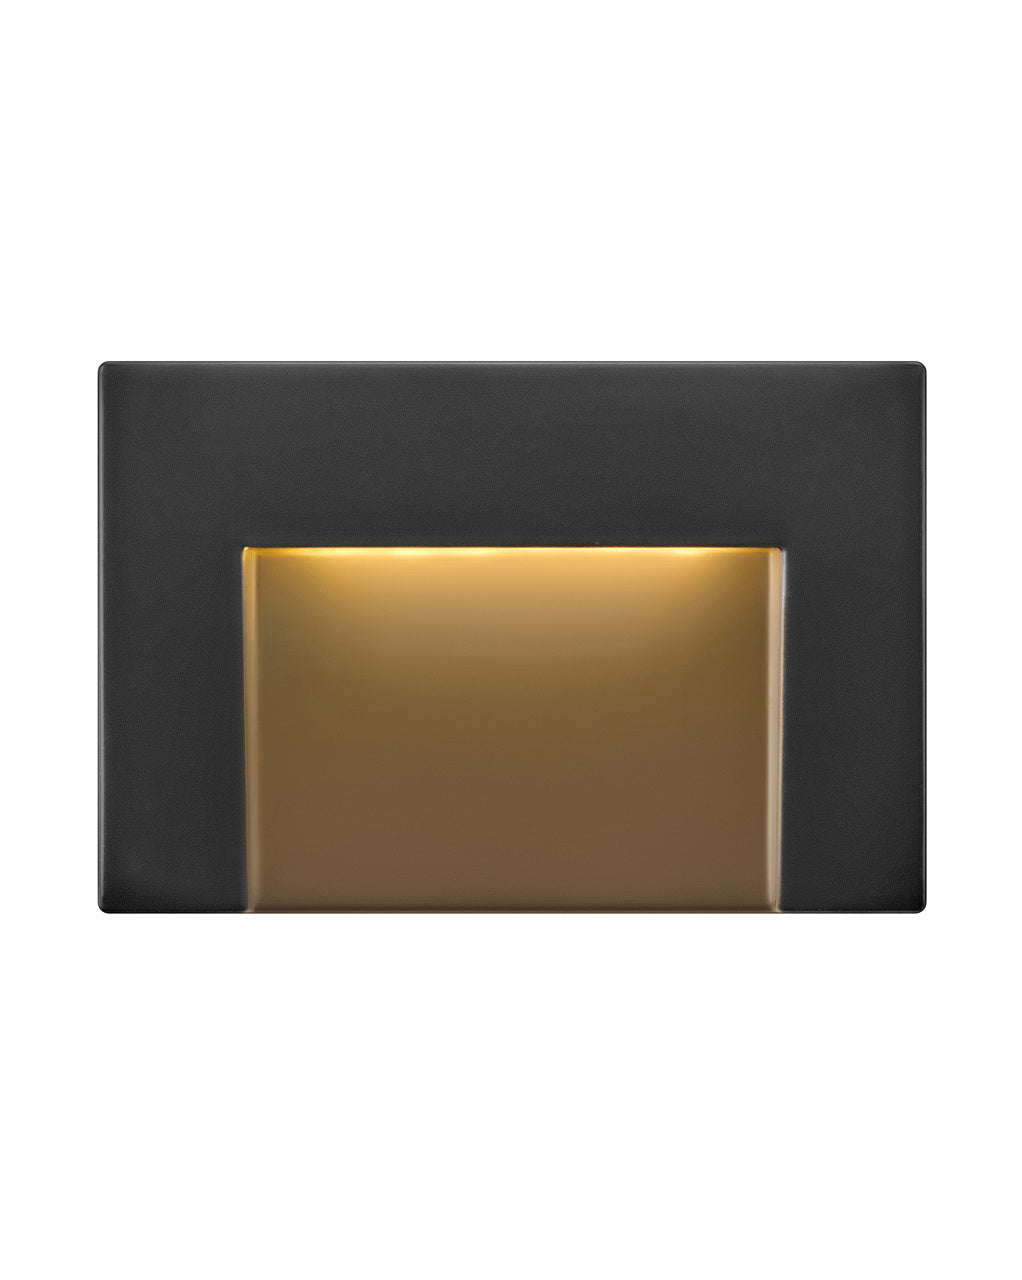 Taper Deck Sconce LED Wall Sconce in Satin Black